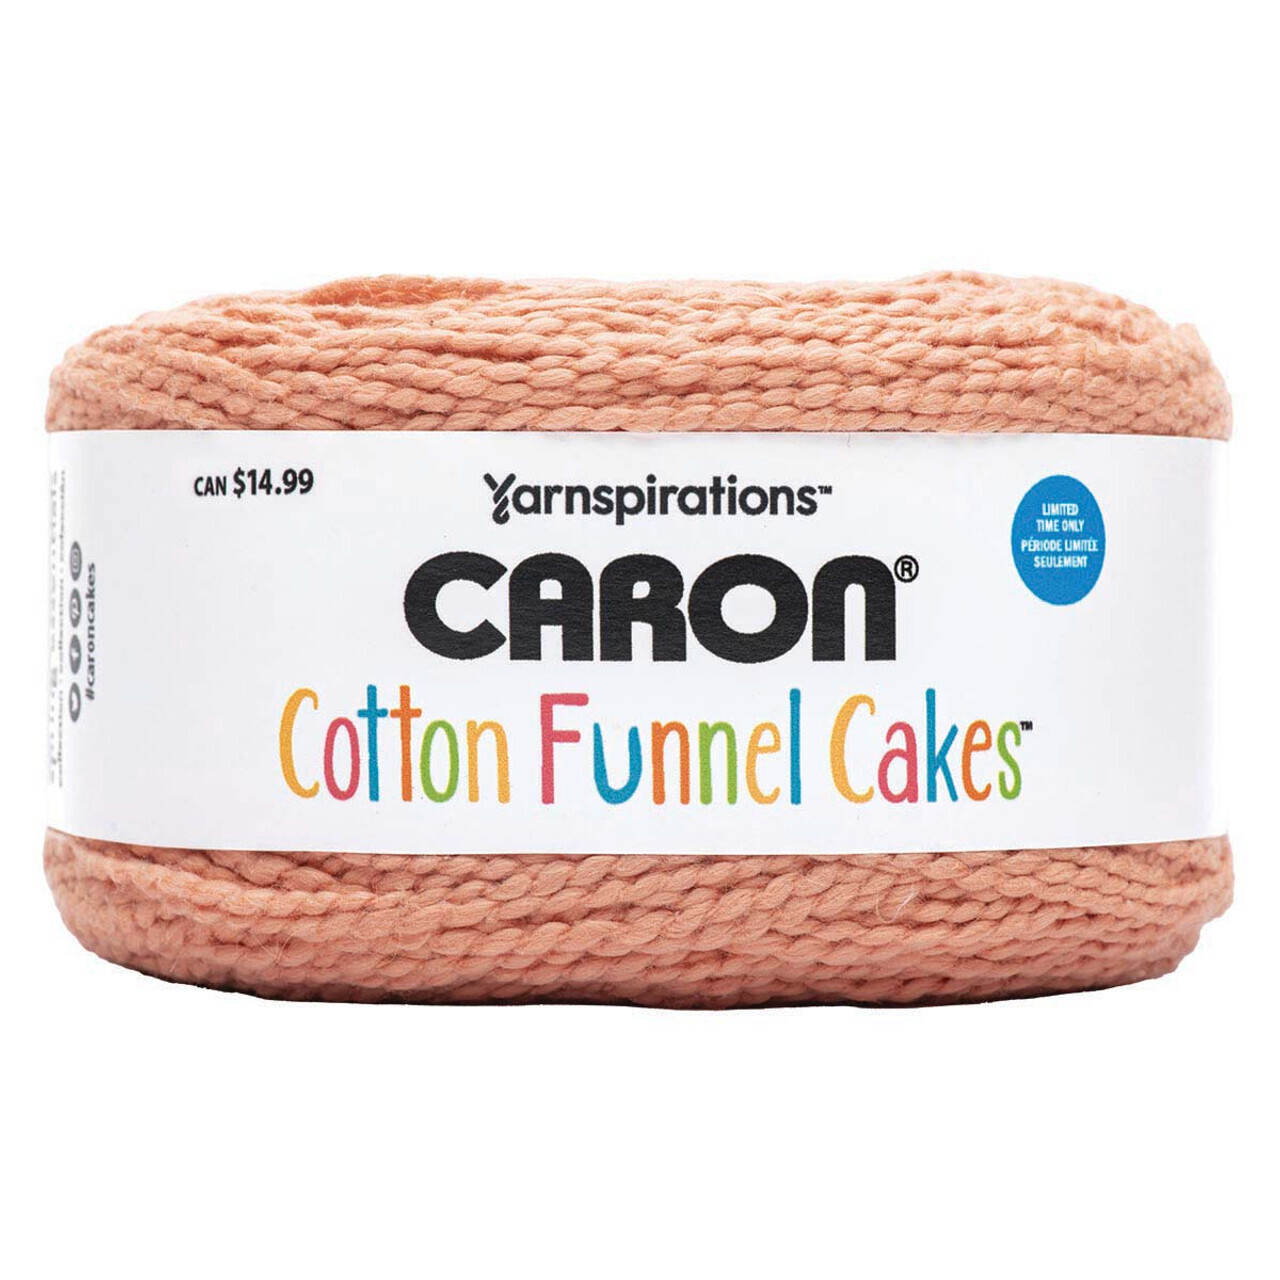 Caron Cloud Cakes / Reviewed and worked up 